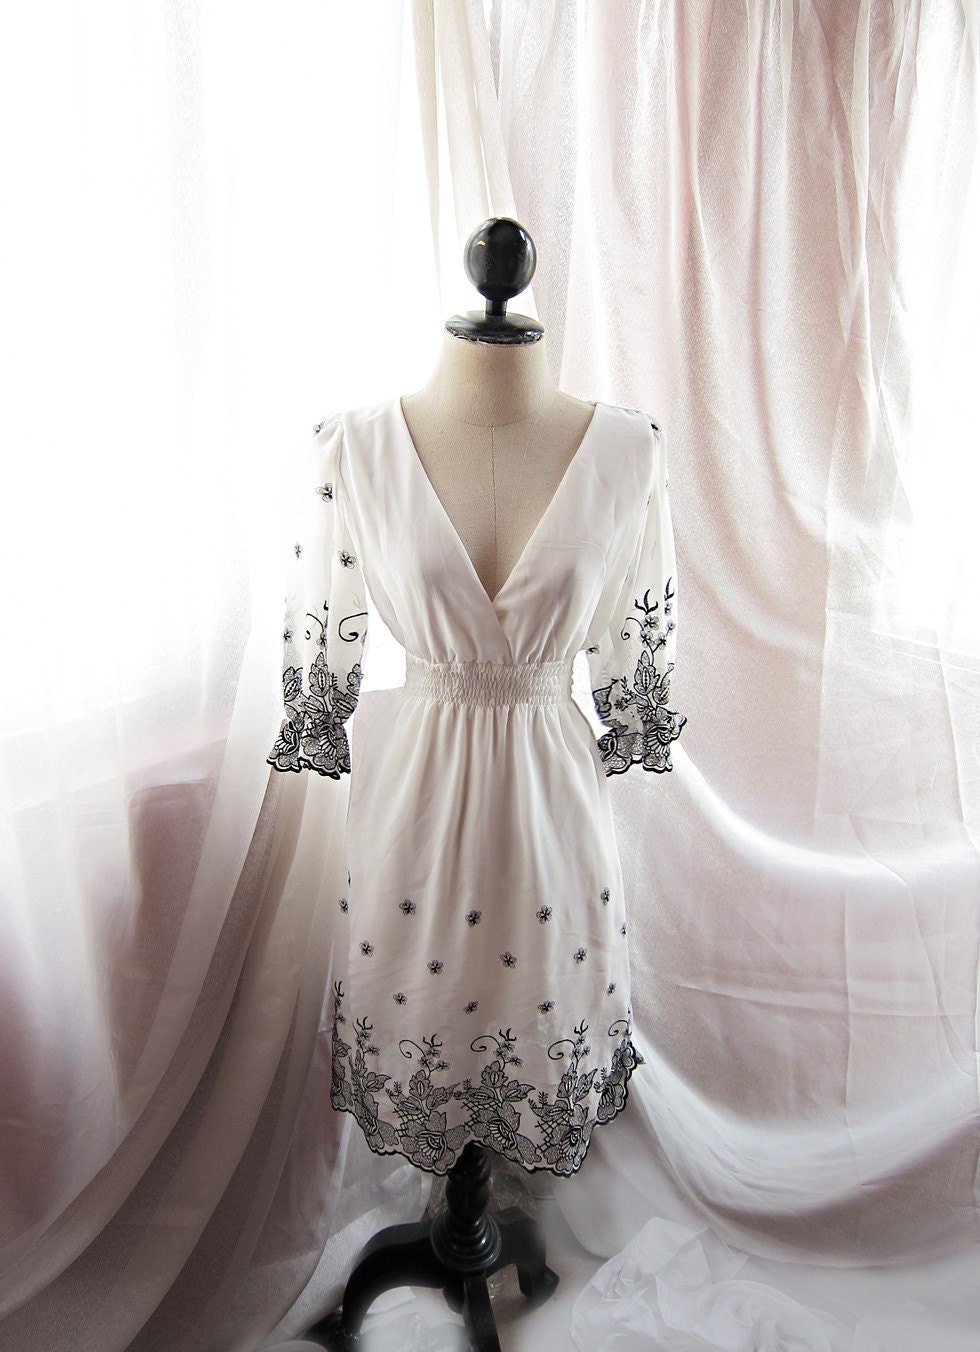 Romantic Misty Midsummer Night Dream Whimsical Embroidered Floral Motif Poet Sleeves Nostalgia Ivory Pure Linen White Chiffon Dress